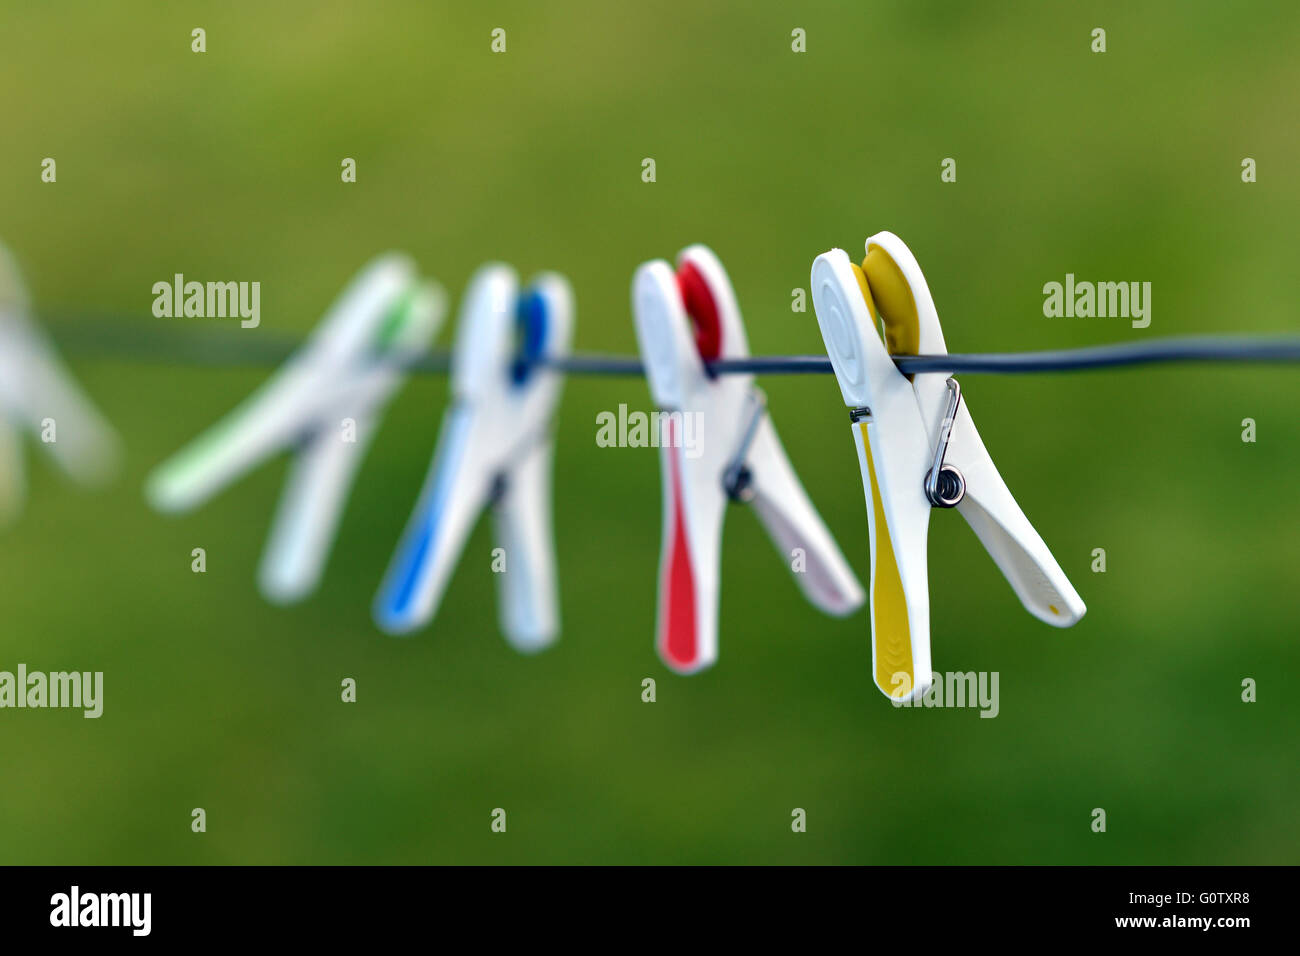 Plastic clothes pegs Stock Photo